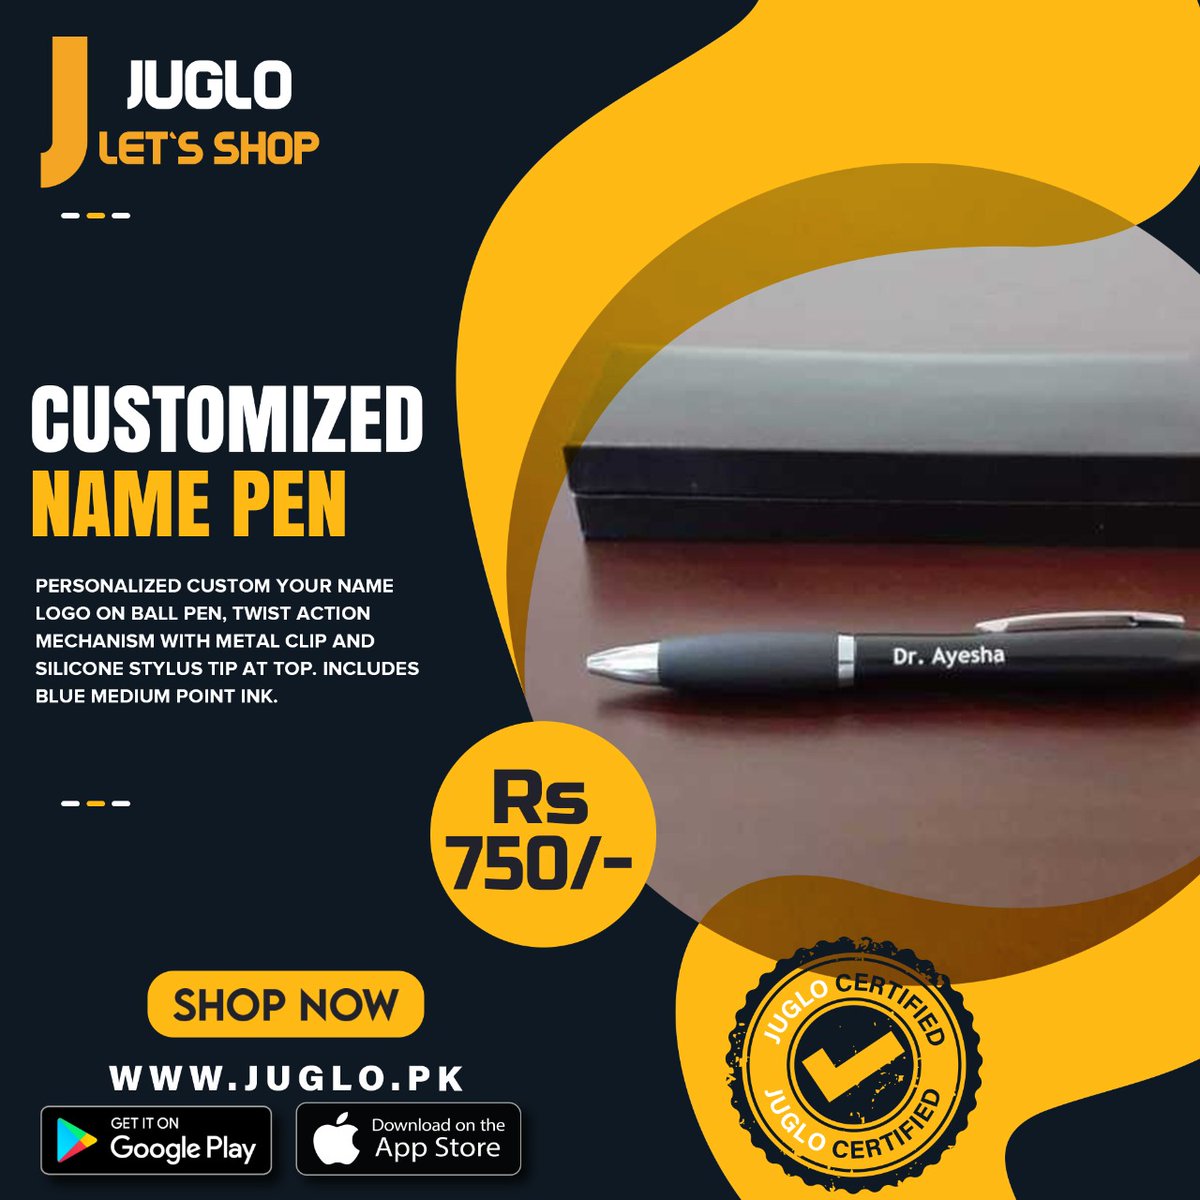 The Ball Pen is Here to Give You the Best Writing Experiences...
Best Gift Item & Perfect For Office Use!!!
juglo.pk/light-customiz…
#juglopk #onlineshopping #shopping #ballpen 
#customizedpen #perfectgift #officeuse #stationery #writting #highquality